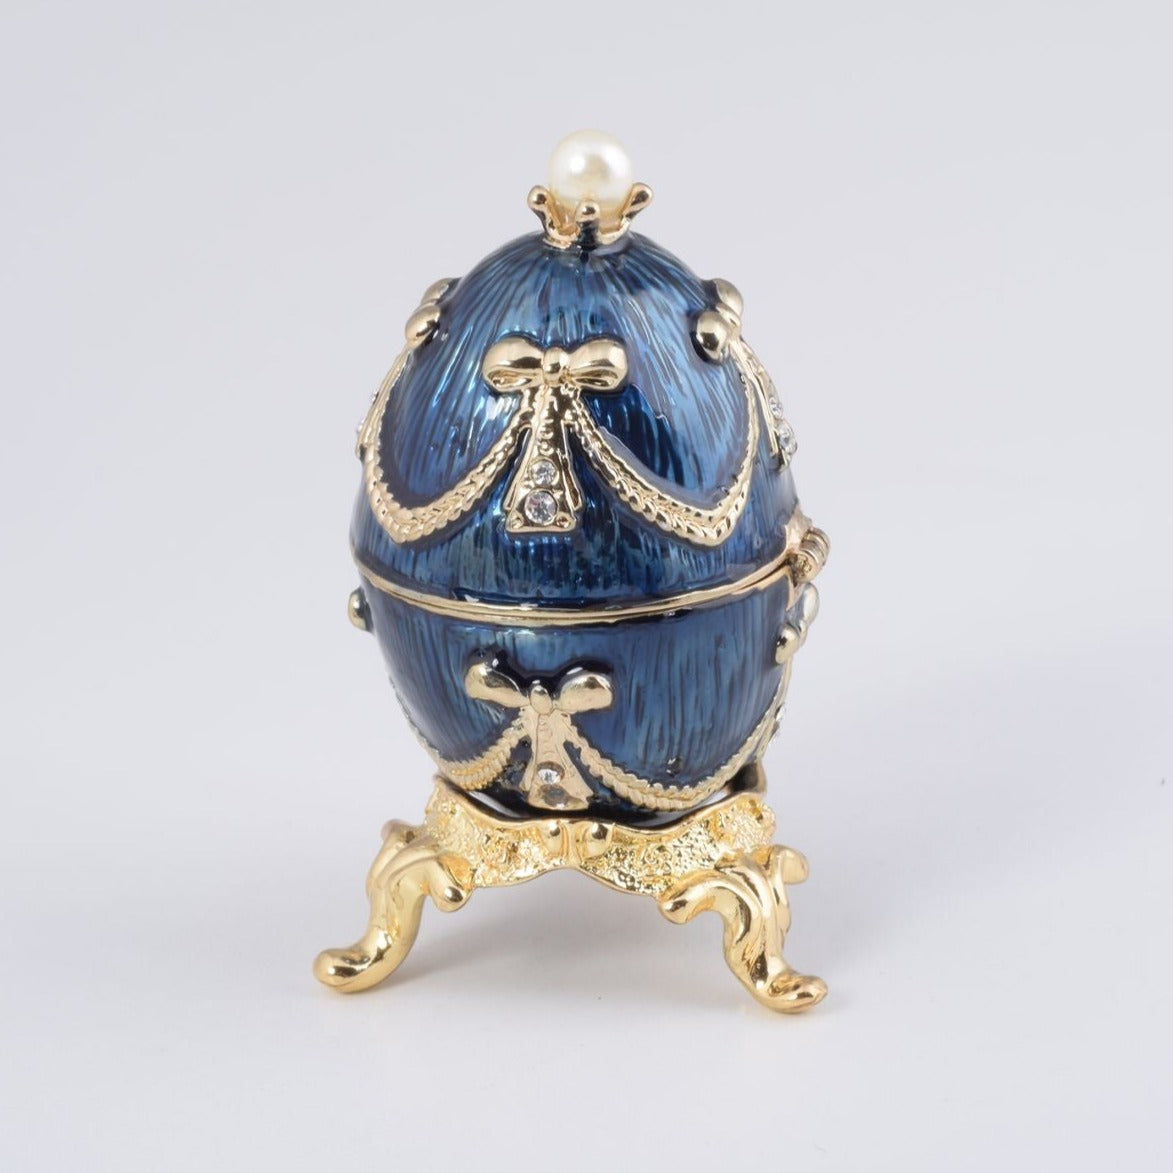 Blue & Gold Faberge Egg with a Perl on Top